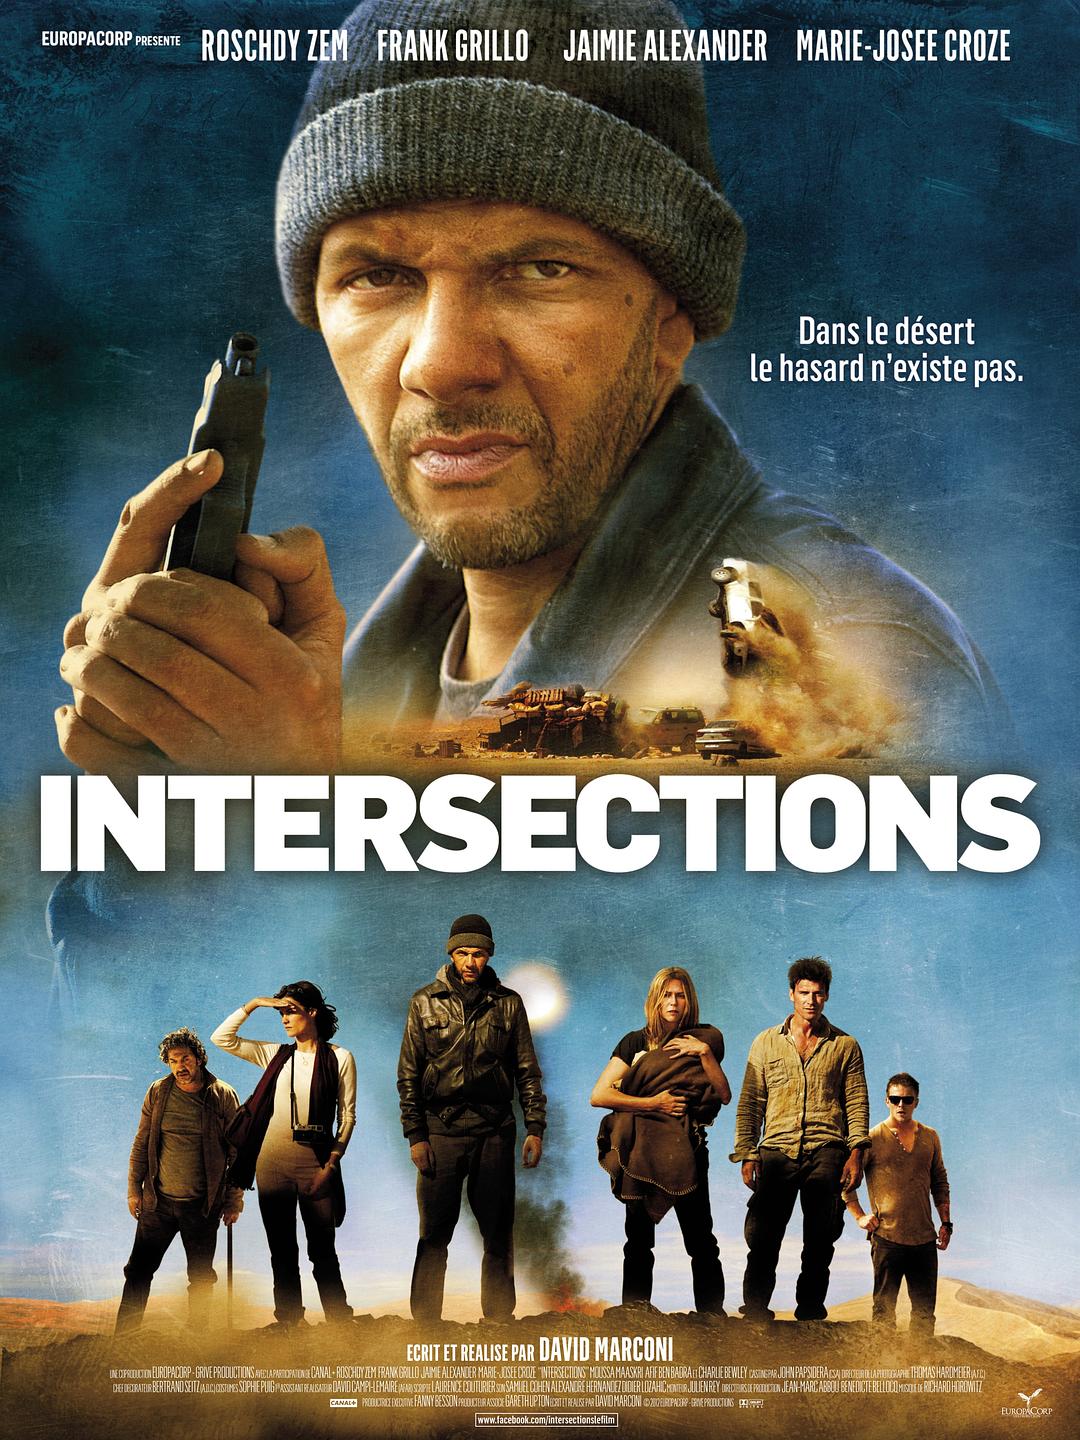  Intersections.2013.1080p.BluRay.x264-RUSTED 7.64GB-1.png